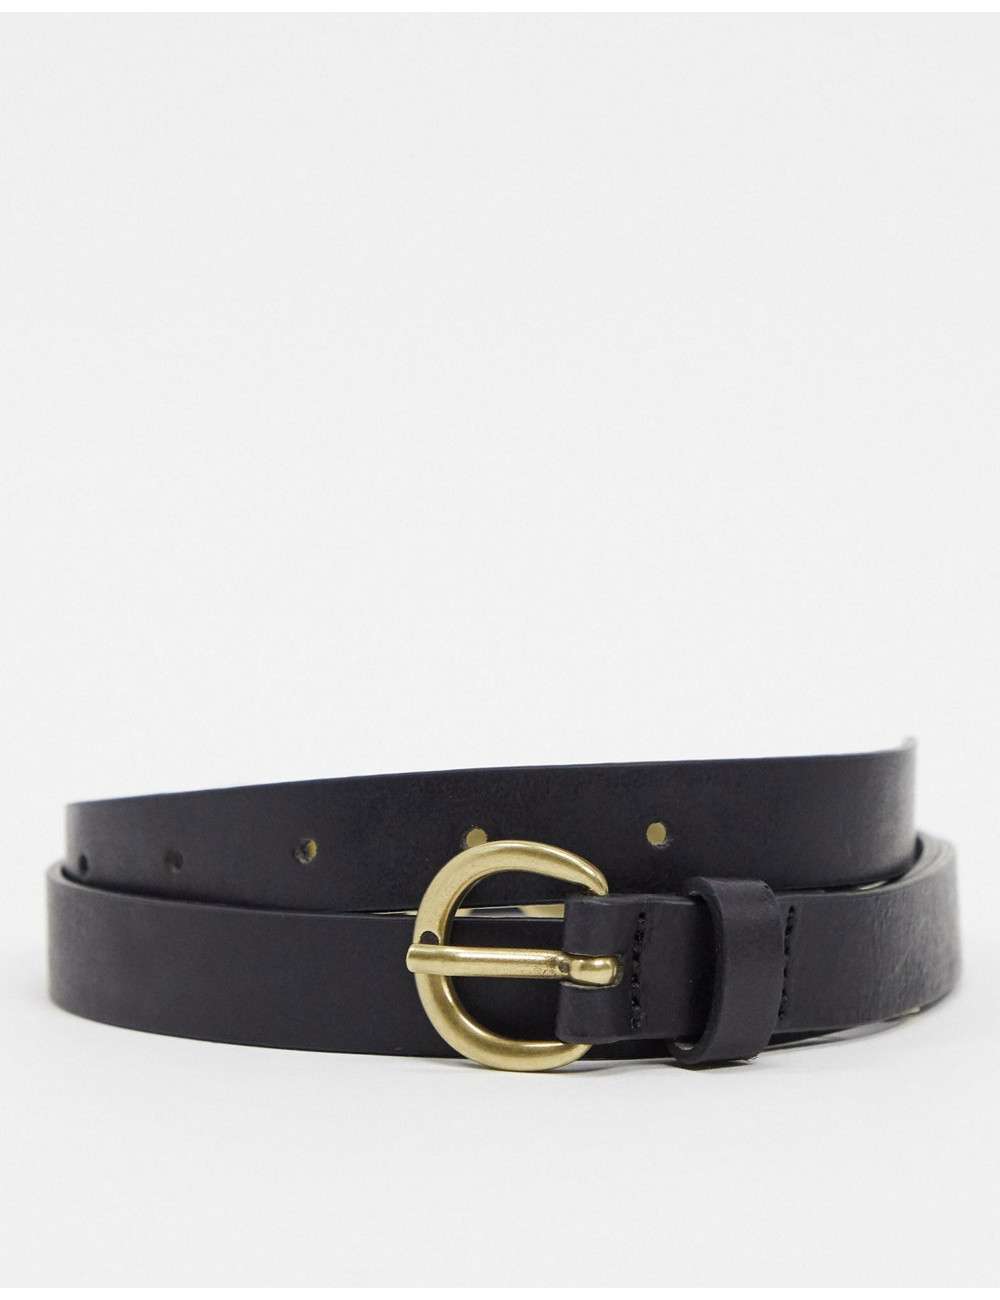 Levi's leather belt with...